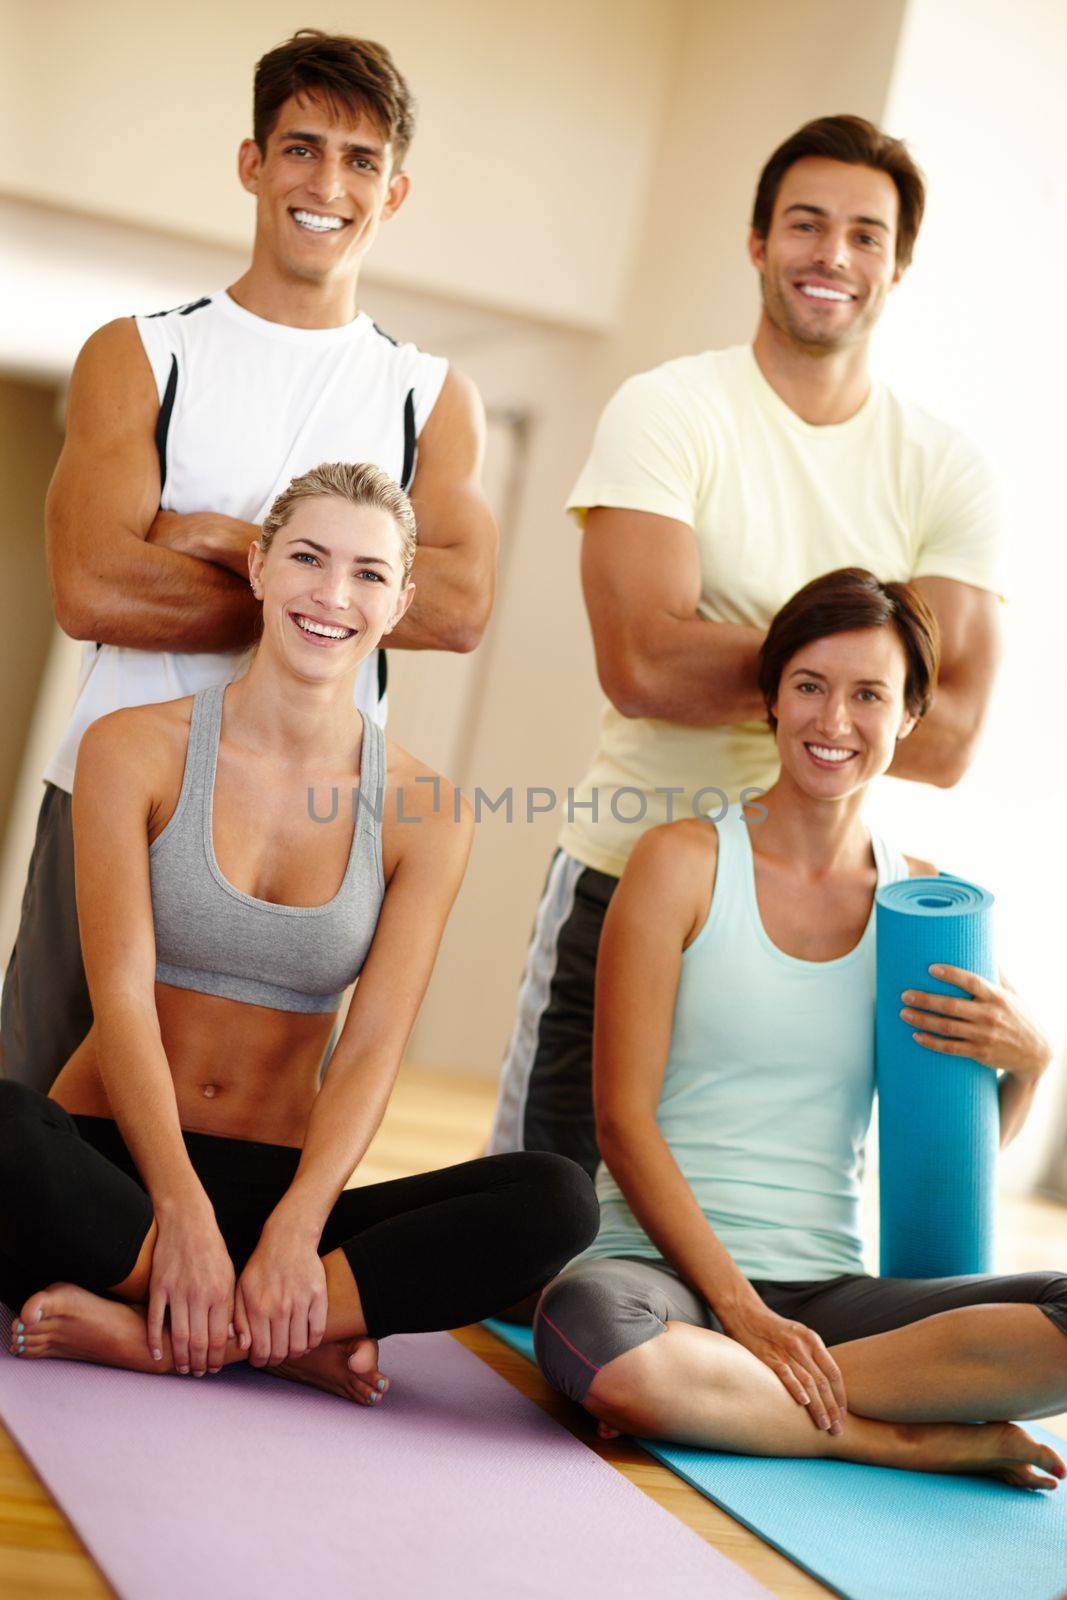 Yoga for everyone. Portrait of four young adults smiling at the camera with their yoga gear